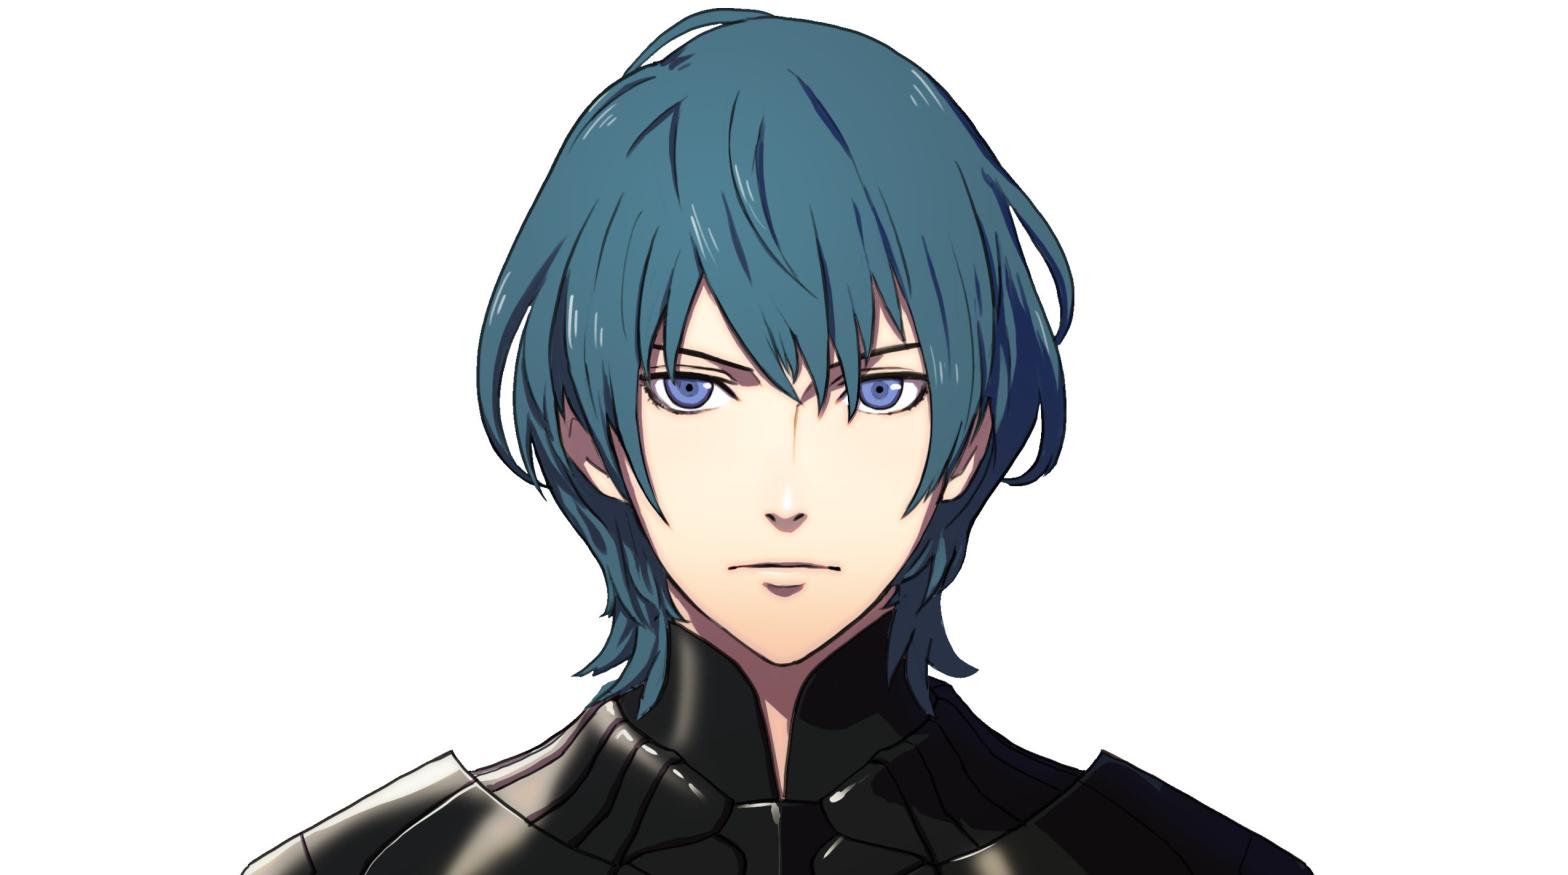 Byleth from Fire Emblem: The Three Houses. (Image: Nintendo)